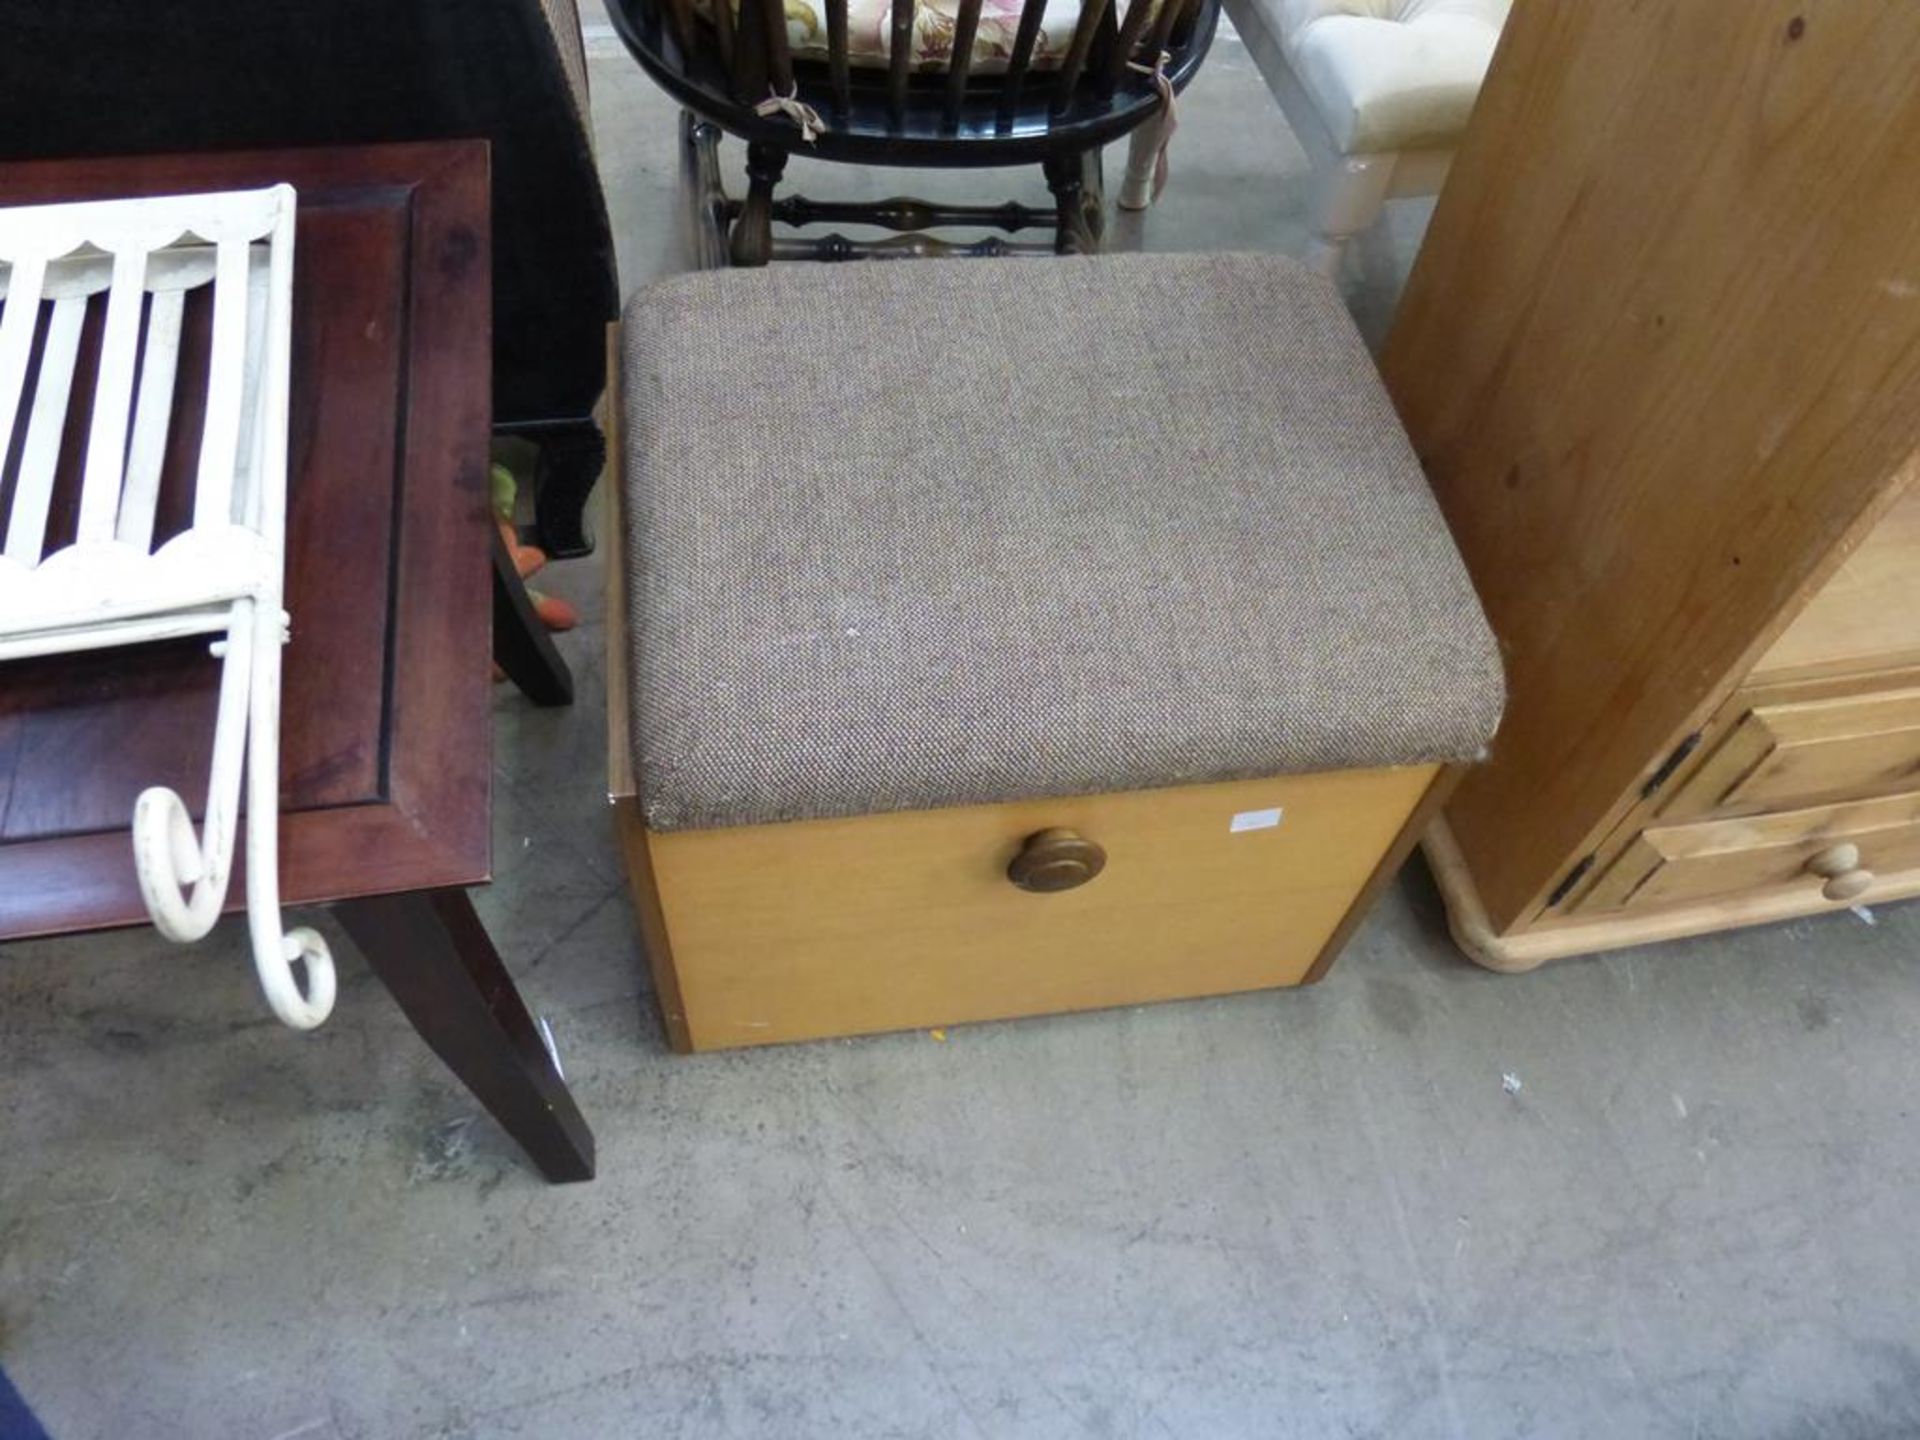 Miscellaneous Furniture - Basket Chair, Two Stools, Magazine Rack, a Coffee Table and a Wall